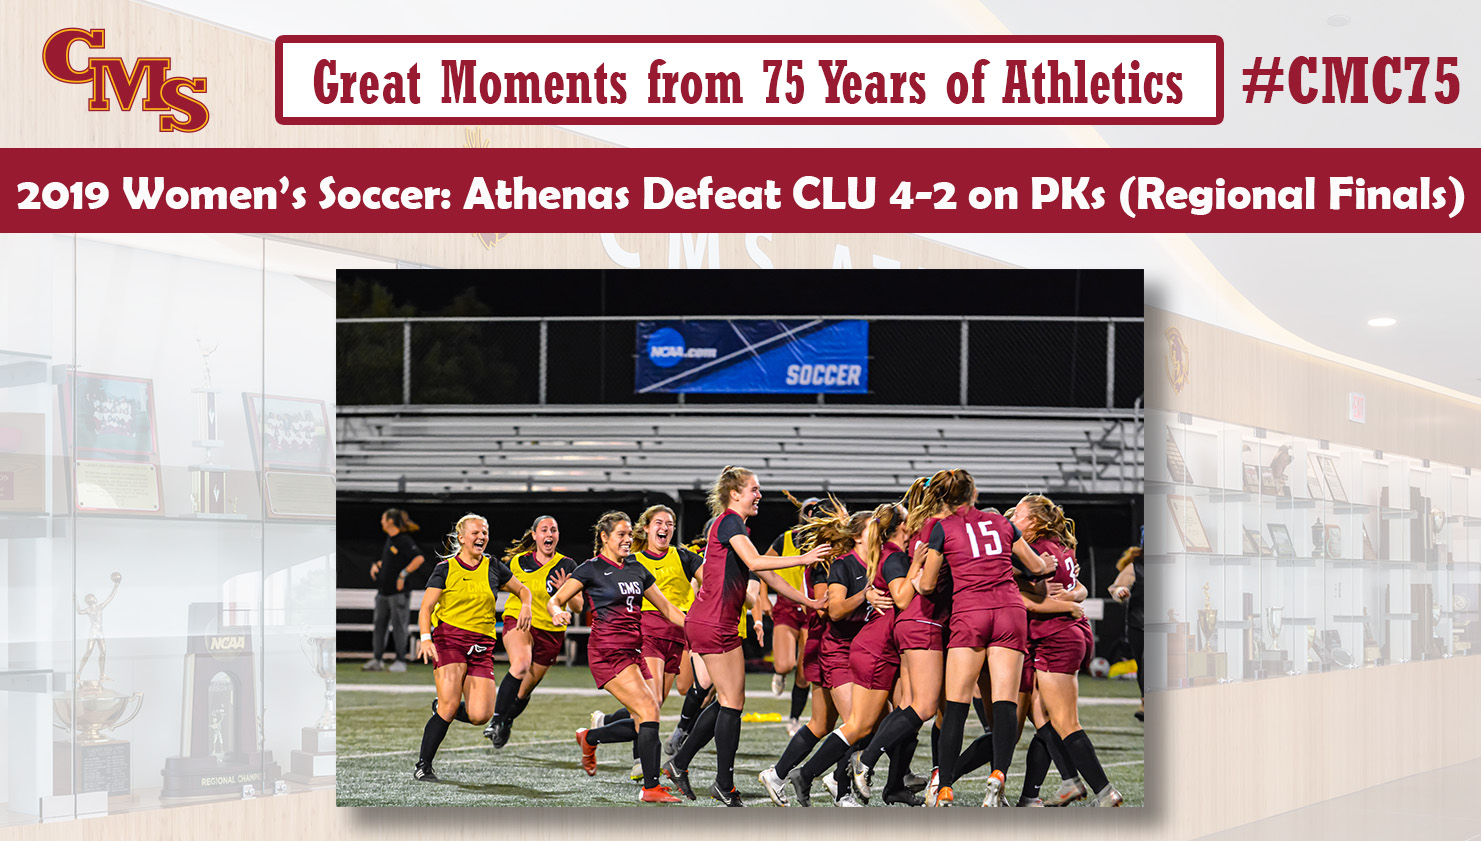 The Athenas celebrating their NCAA Regional Championship. Words over the photo read: Great Moments from 75 Years of Athletics, 2019 Women's Soccer: Athenas Defeat CLU on PKs (Regional Finals)